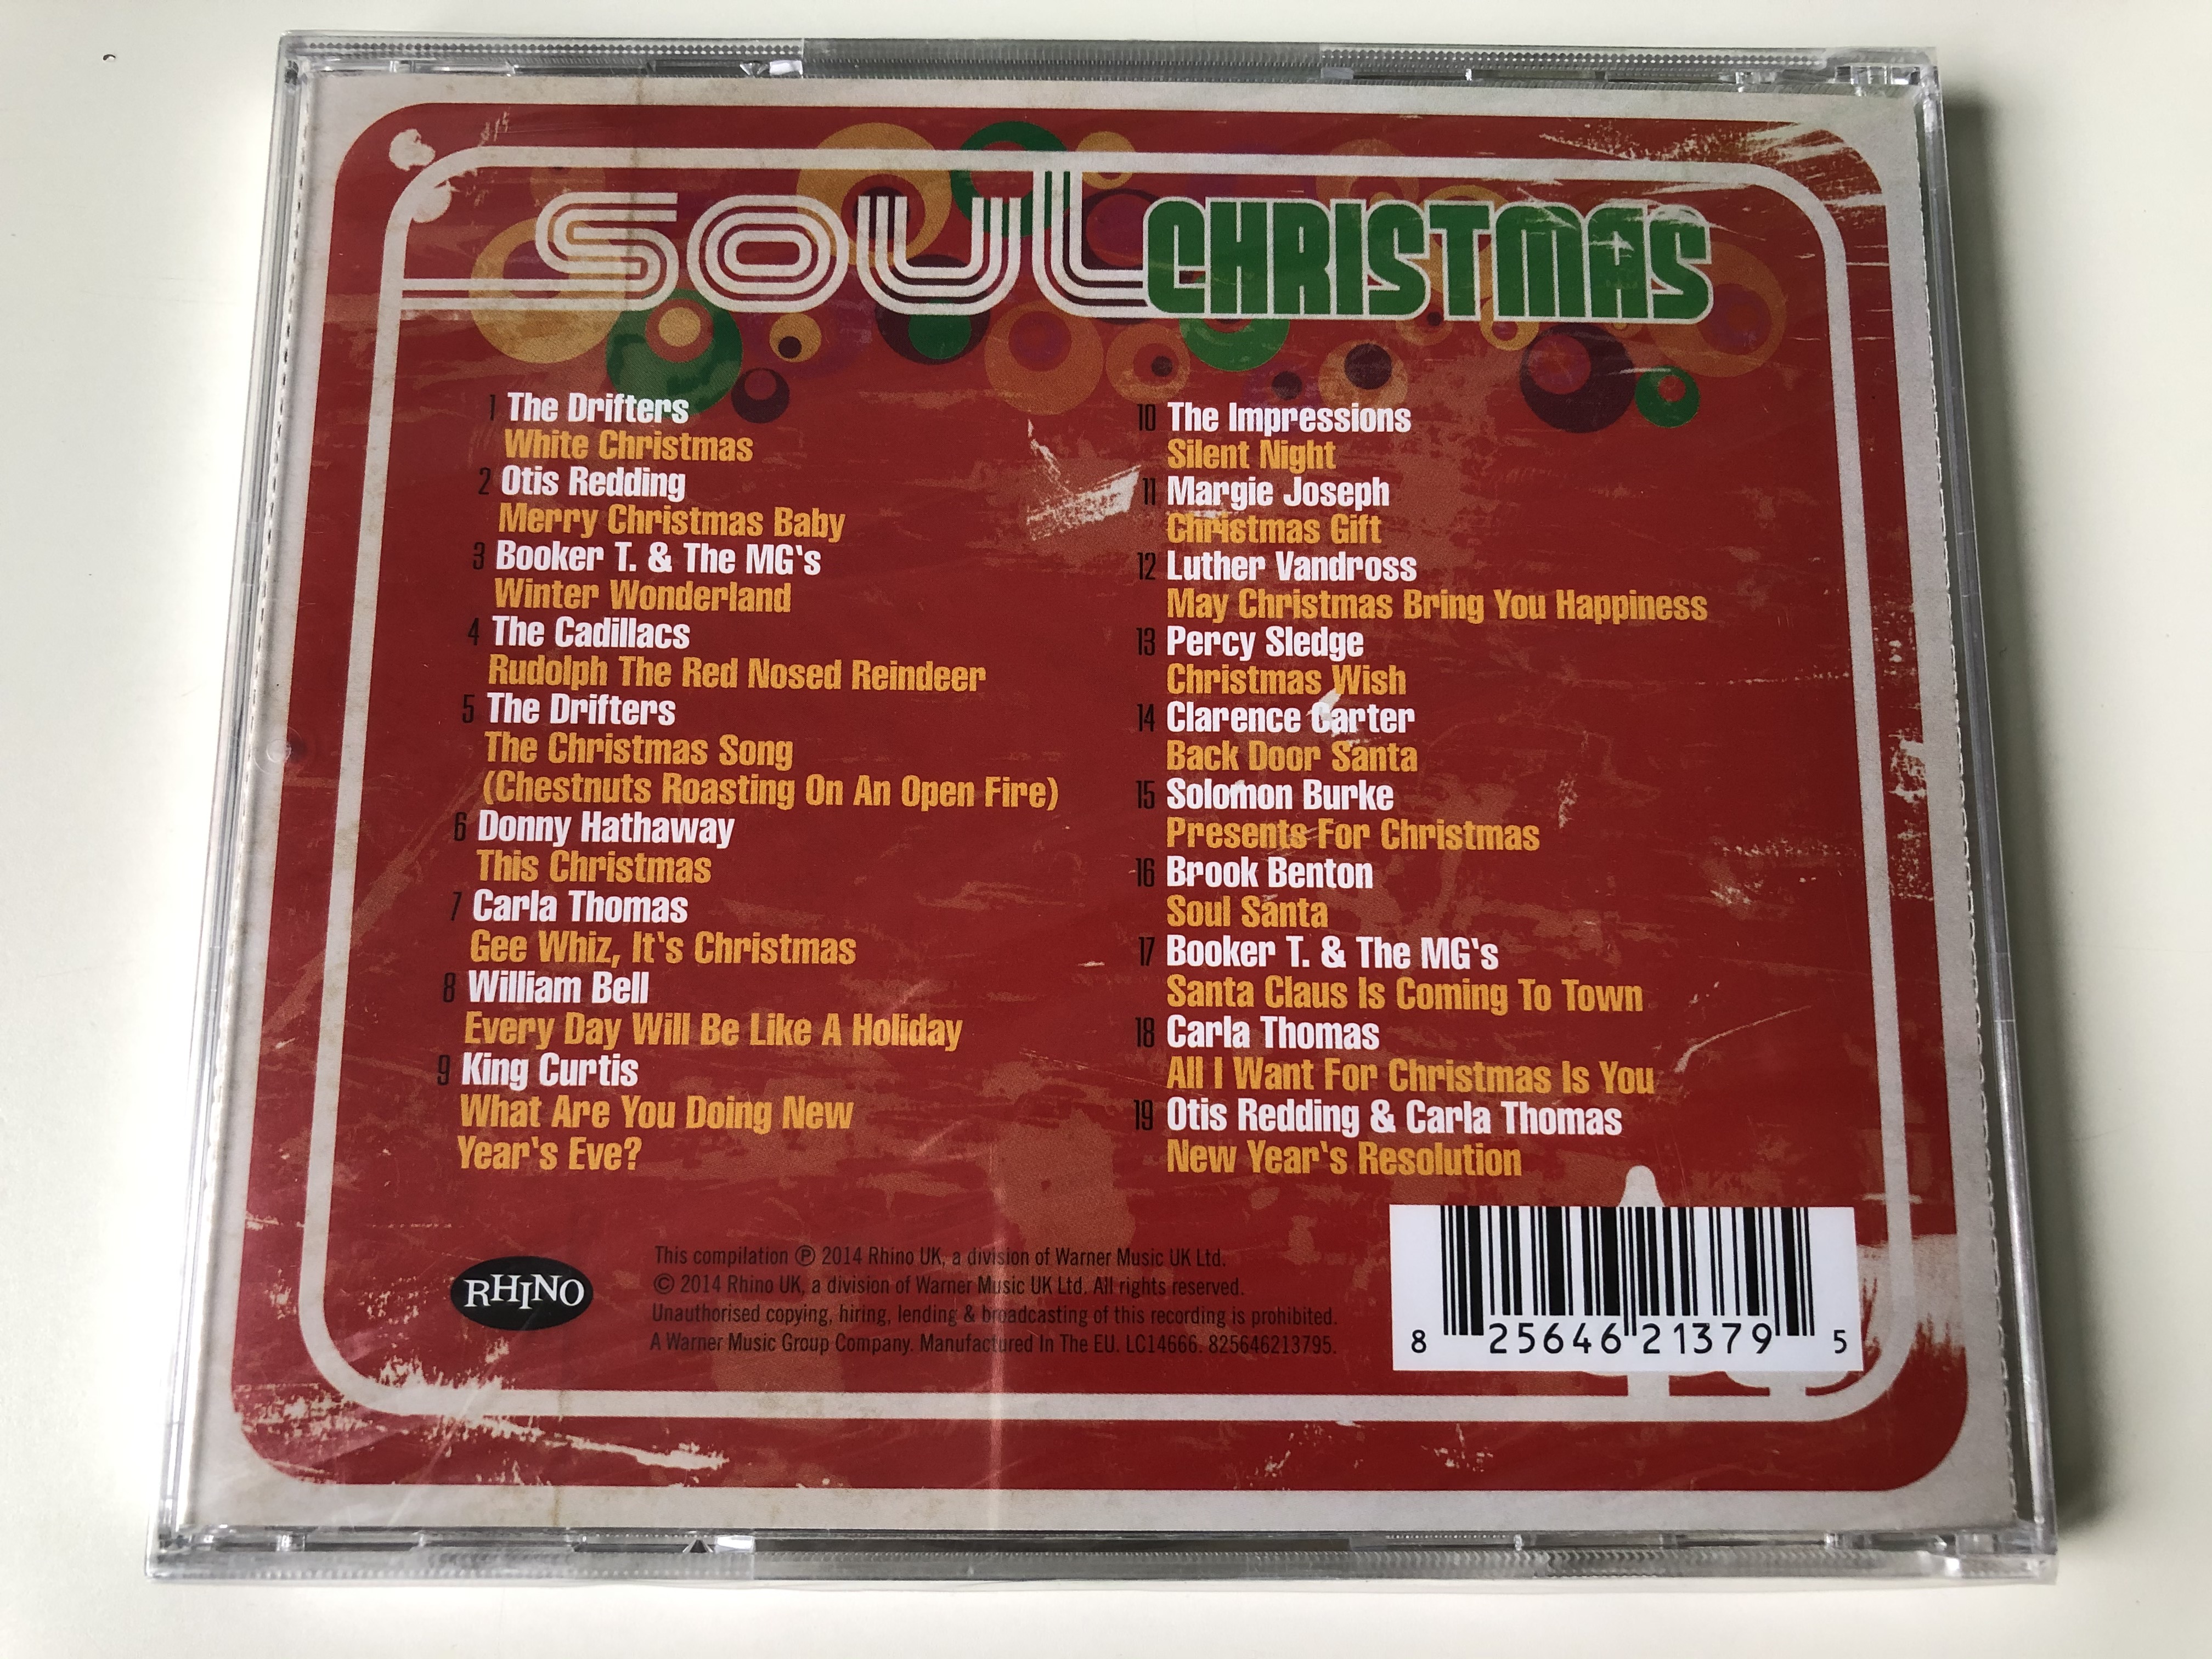 soul-christmas-including-white-christmas-the-christmas-song-winter-wonderland-silent-night-and-many-more-rhino-records-audio-cd-2014-825646213795-2-.jpg